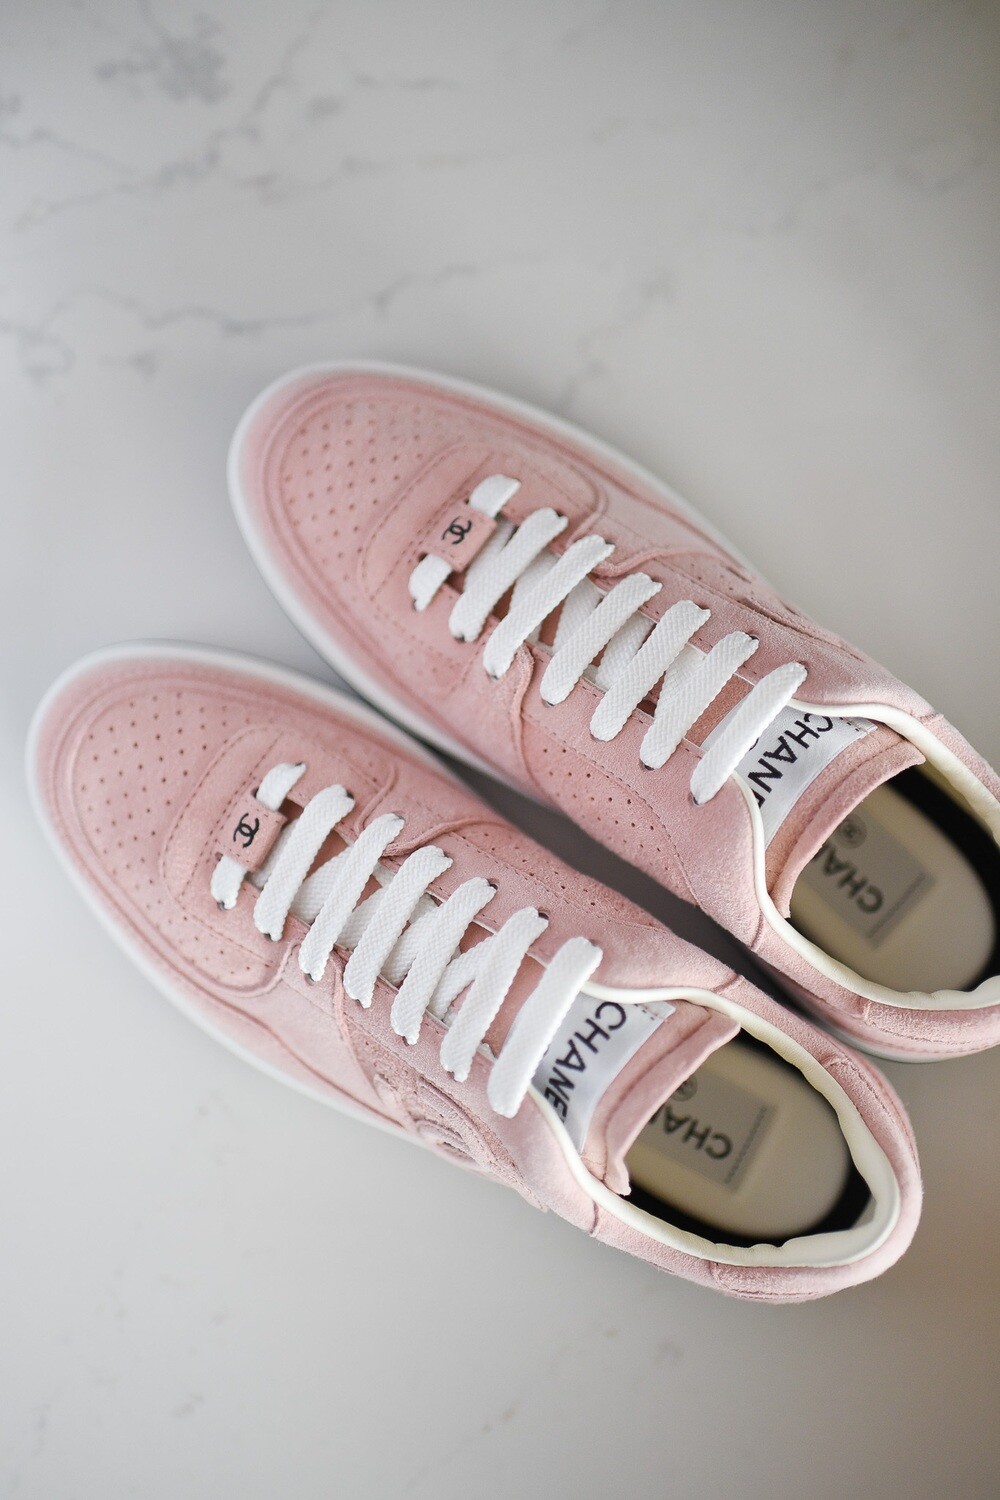 Chanel Sneakers, Pink Suede, New in Box GA001